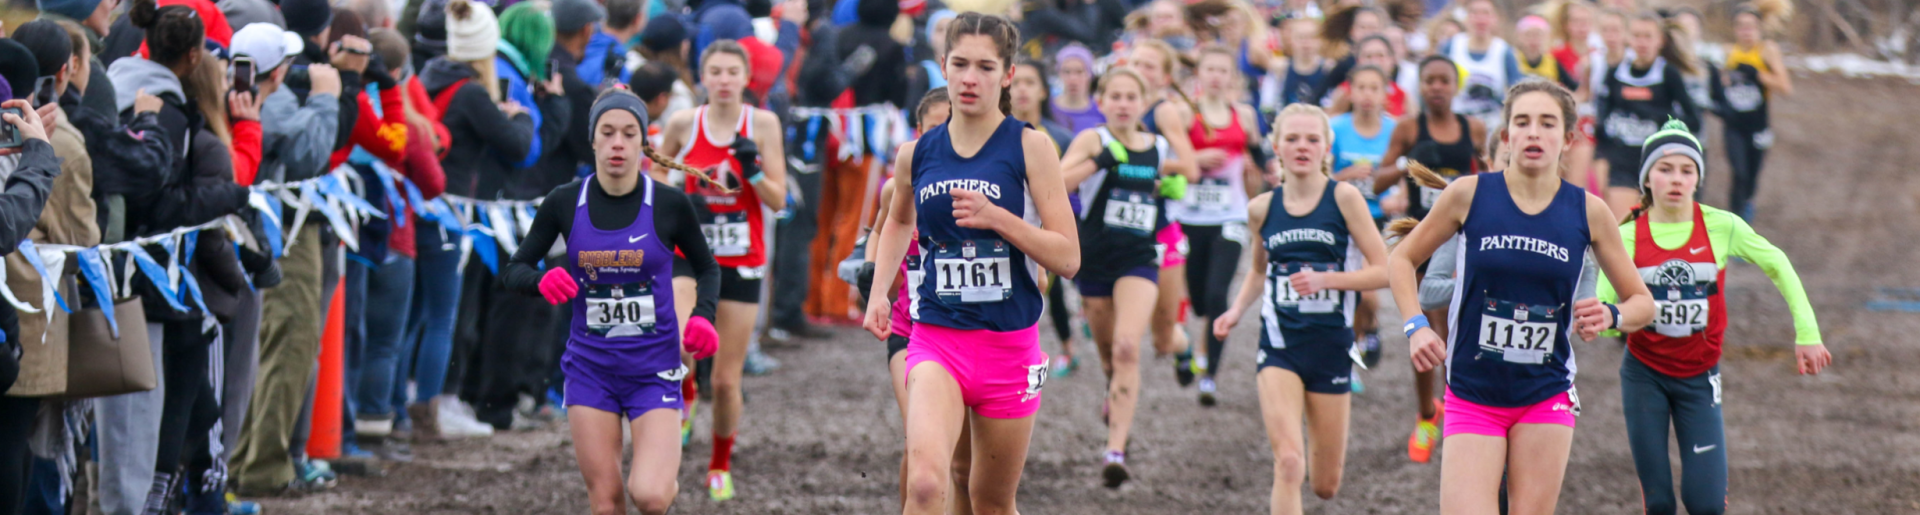 2019 USATF National Junior Olympic Cross Country Championships